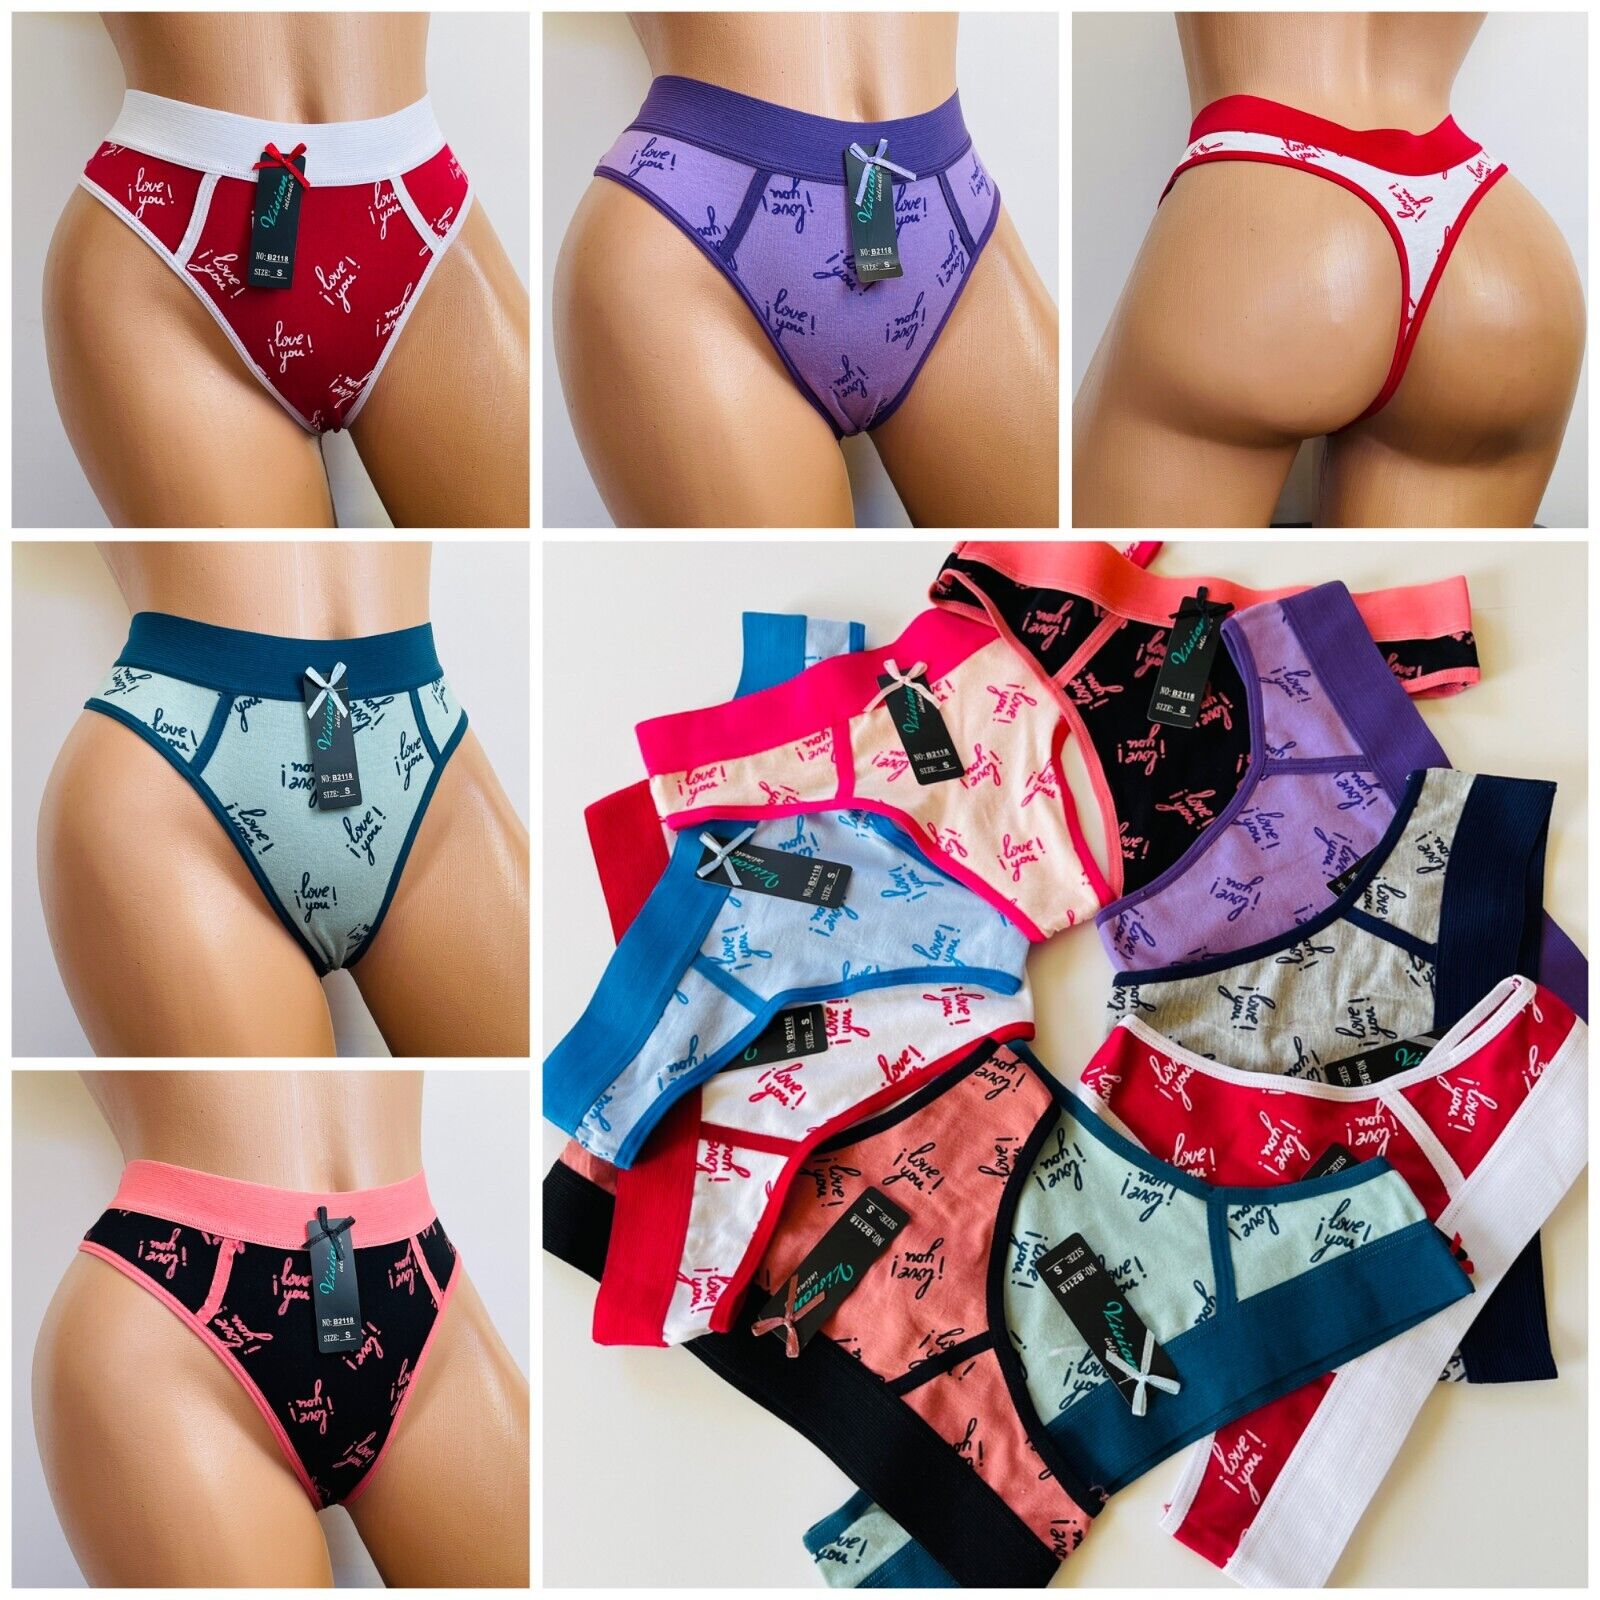 6 Pack Women's Sexy Thongs G-String Cotton Panties Briefs Lingerie Underwear S Vision Does Not Apply